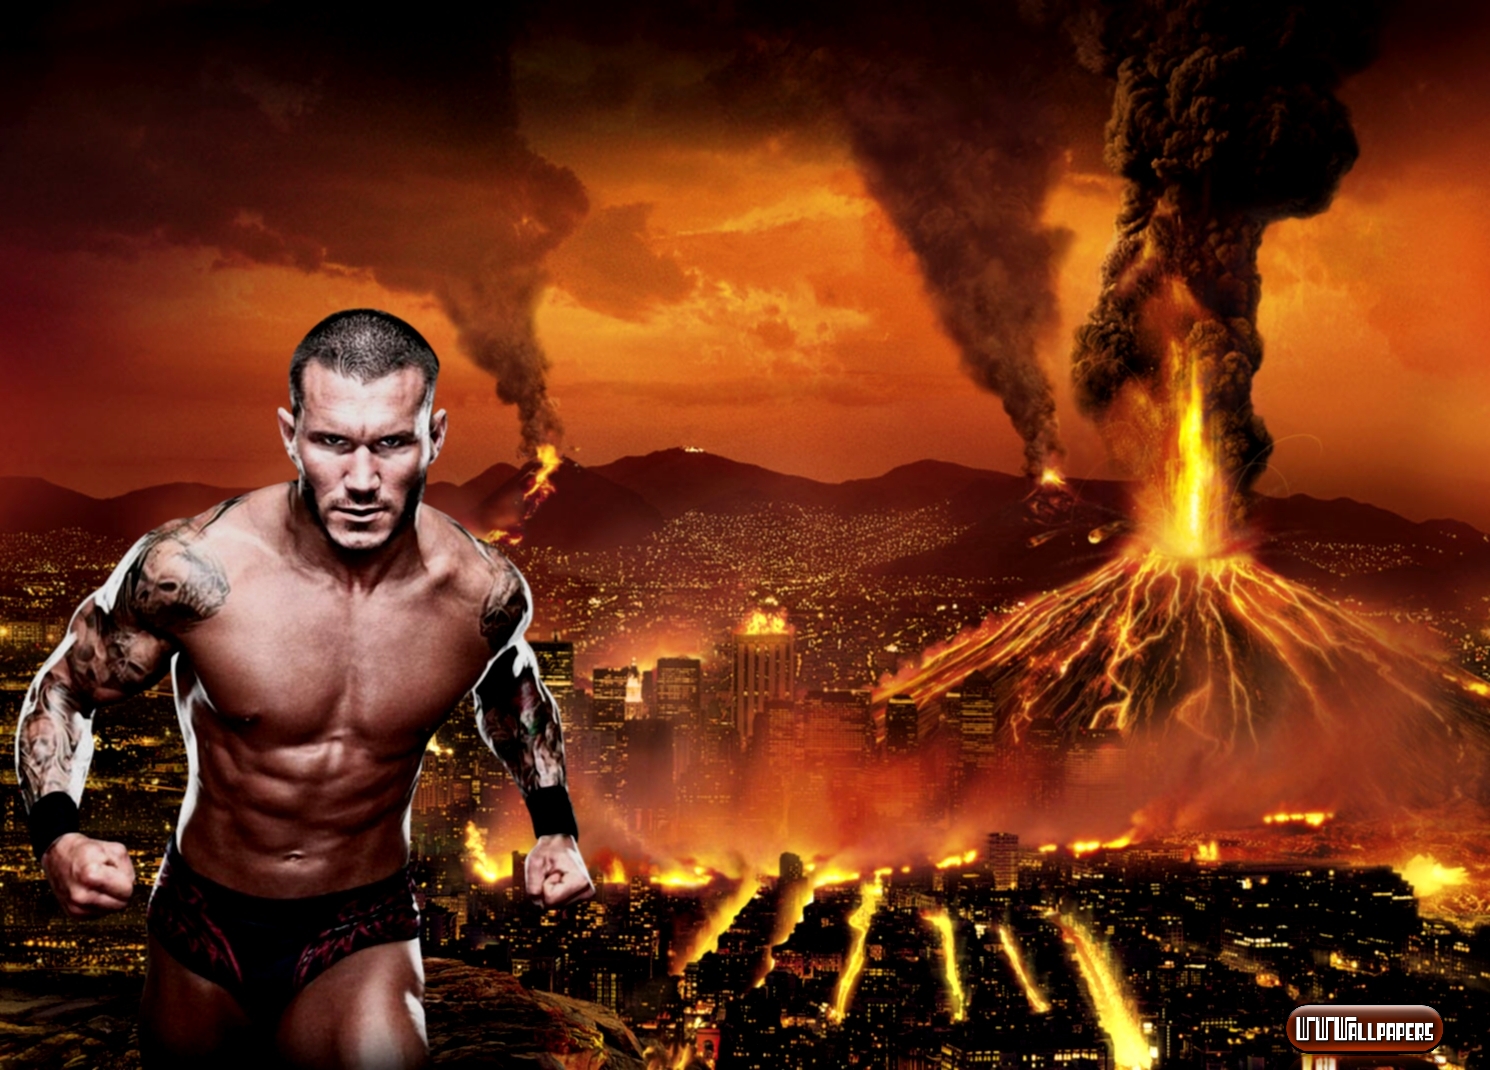 randy orton wallpaper download,action adventure game,pc game,movie,strategy video game,action film